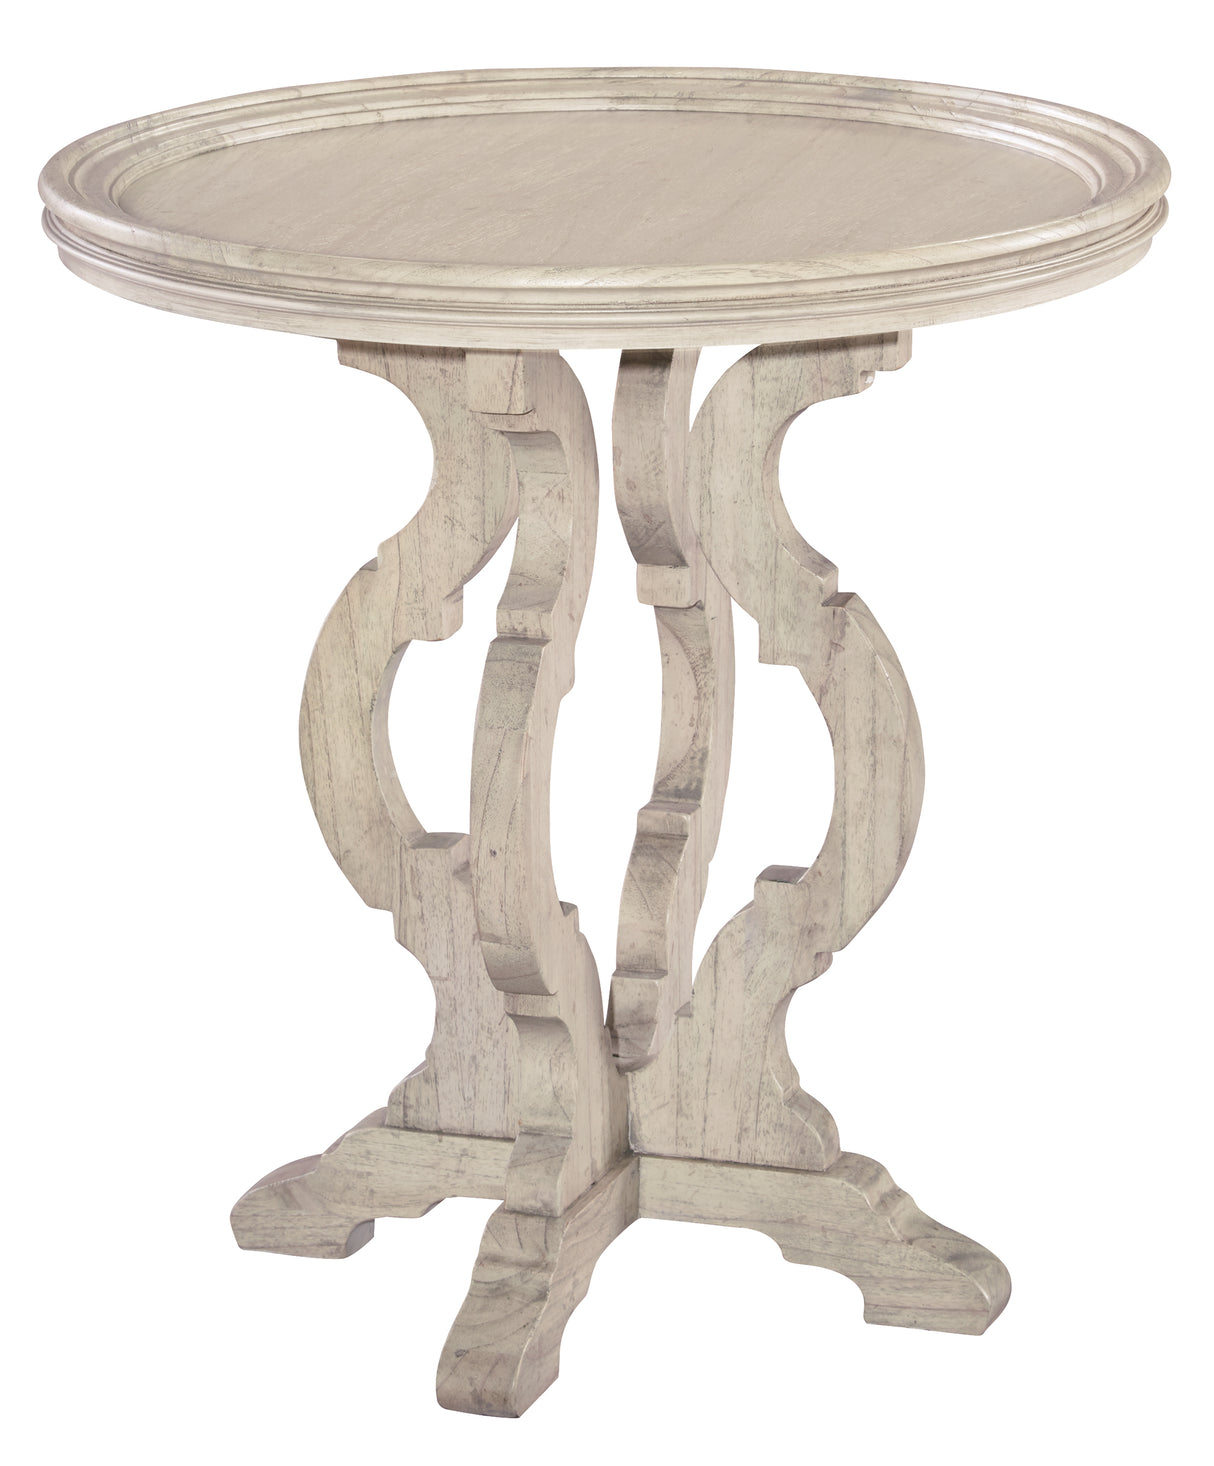 Hekman 12205LN Homestead 24in. x 24in. x 25.5in. Round End Table